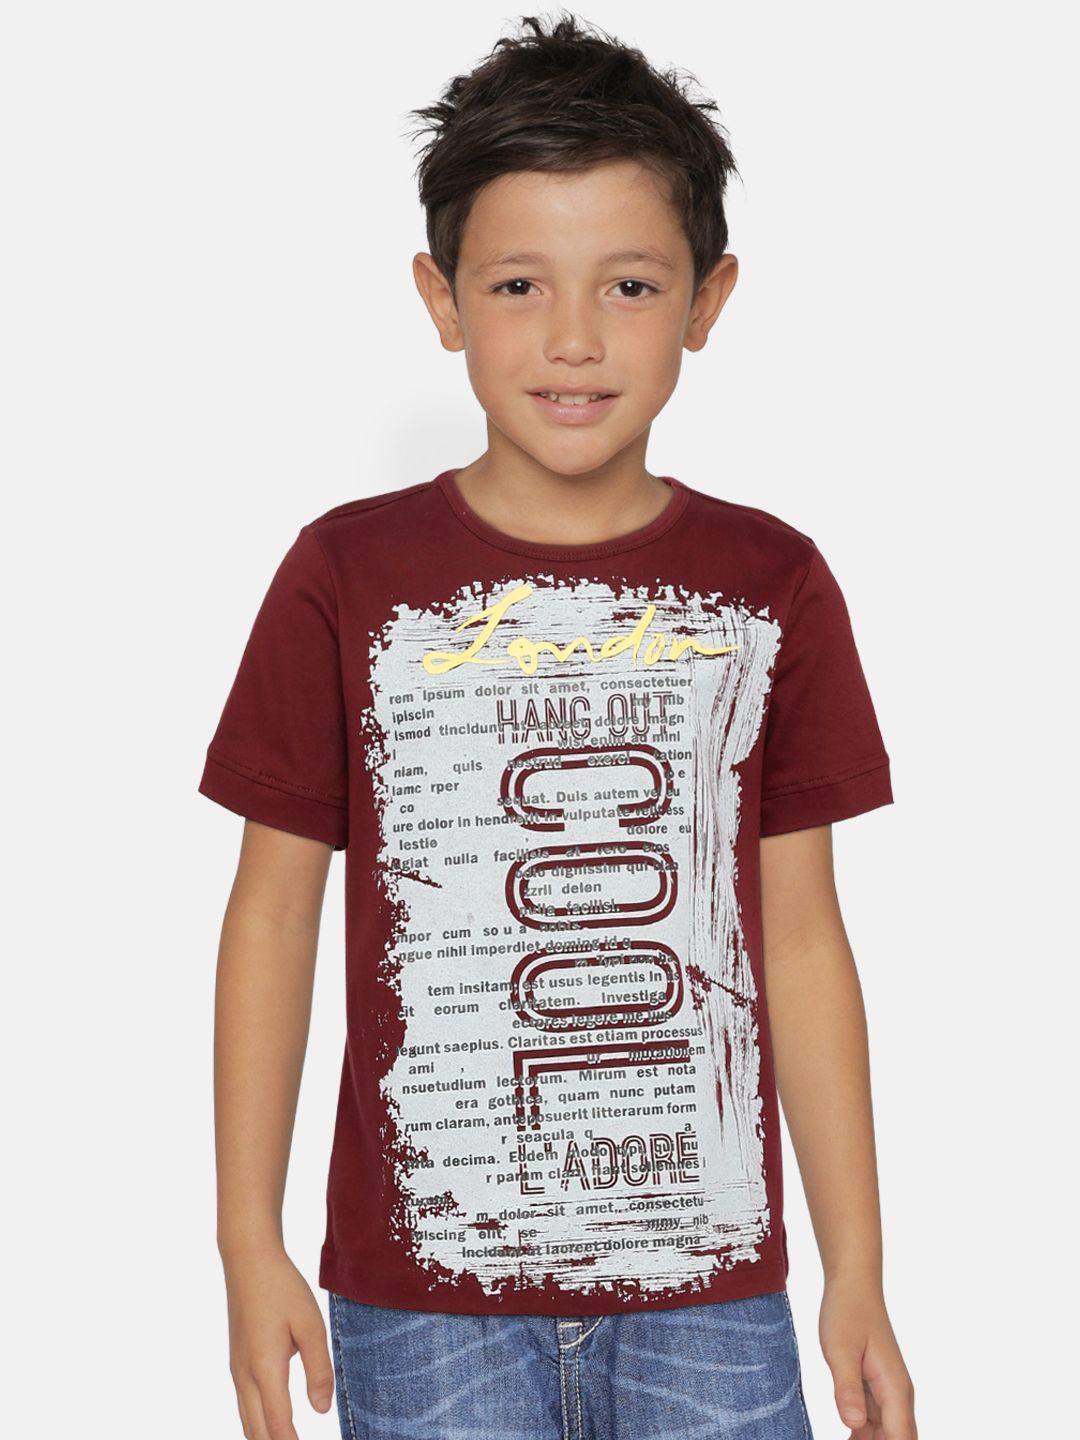 ladore-boys-maroon-printed-round-neck-t-shirt